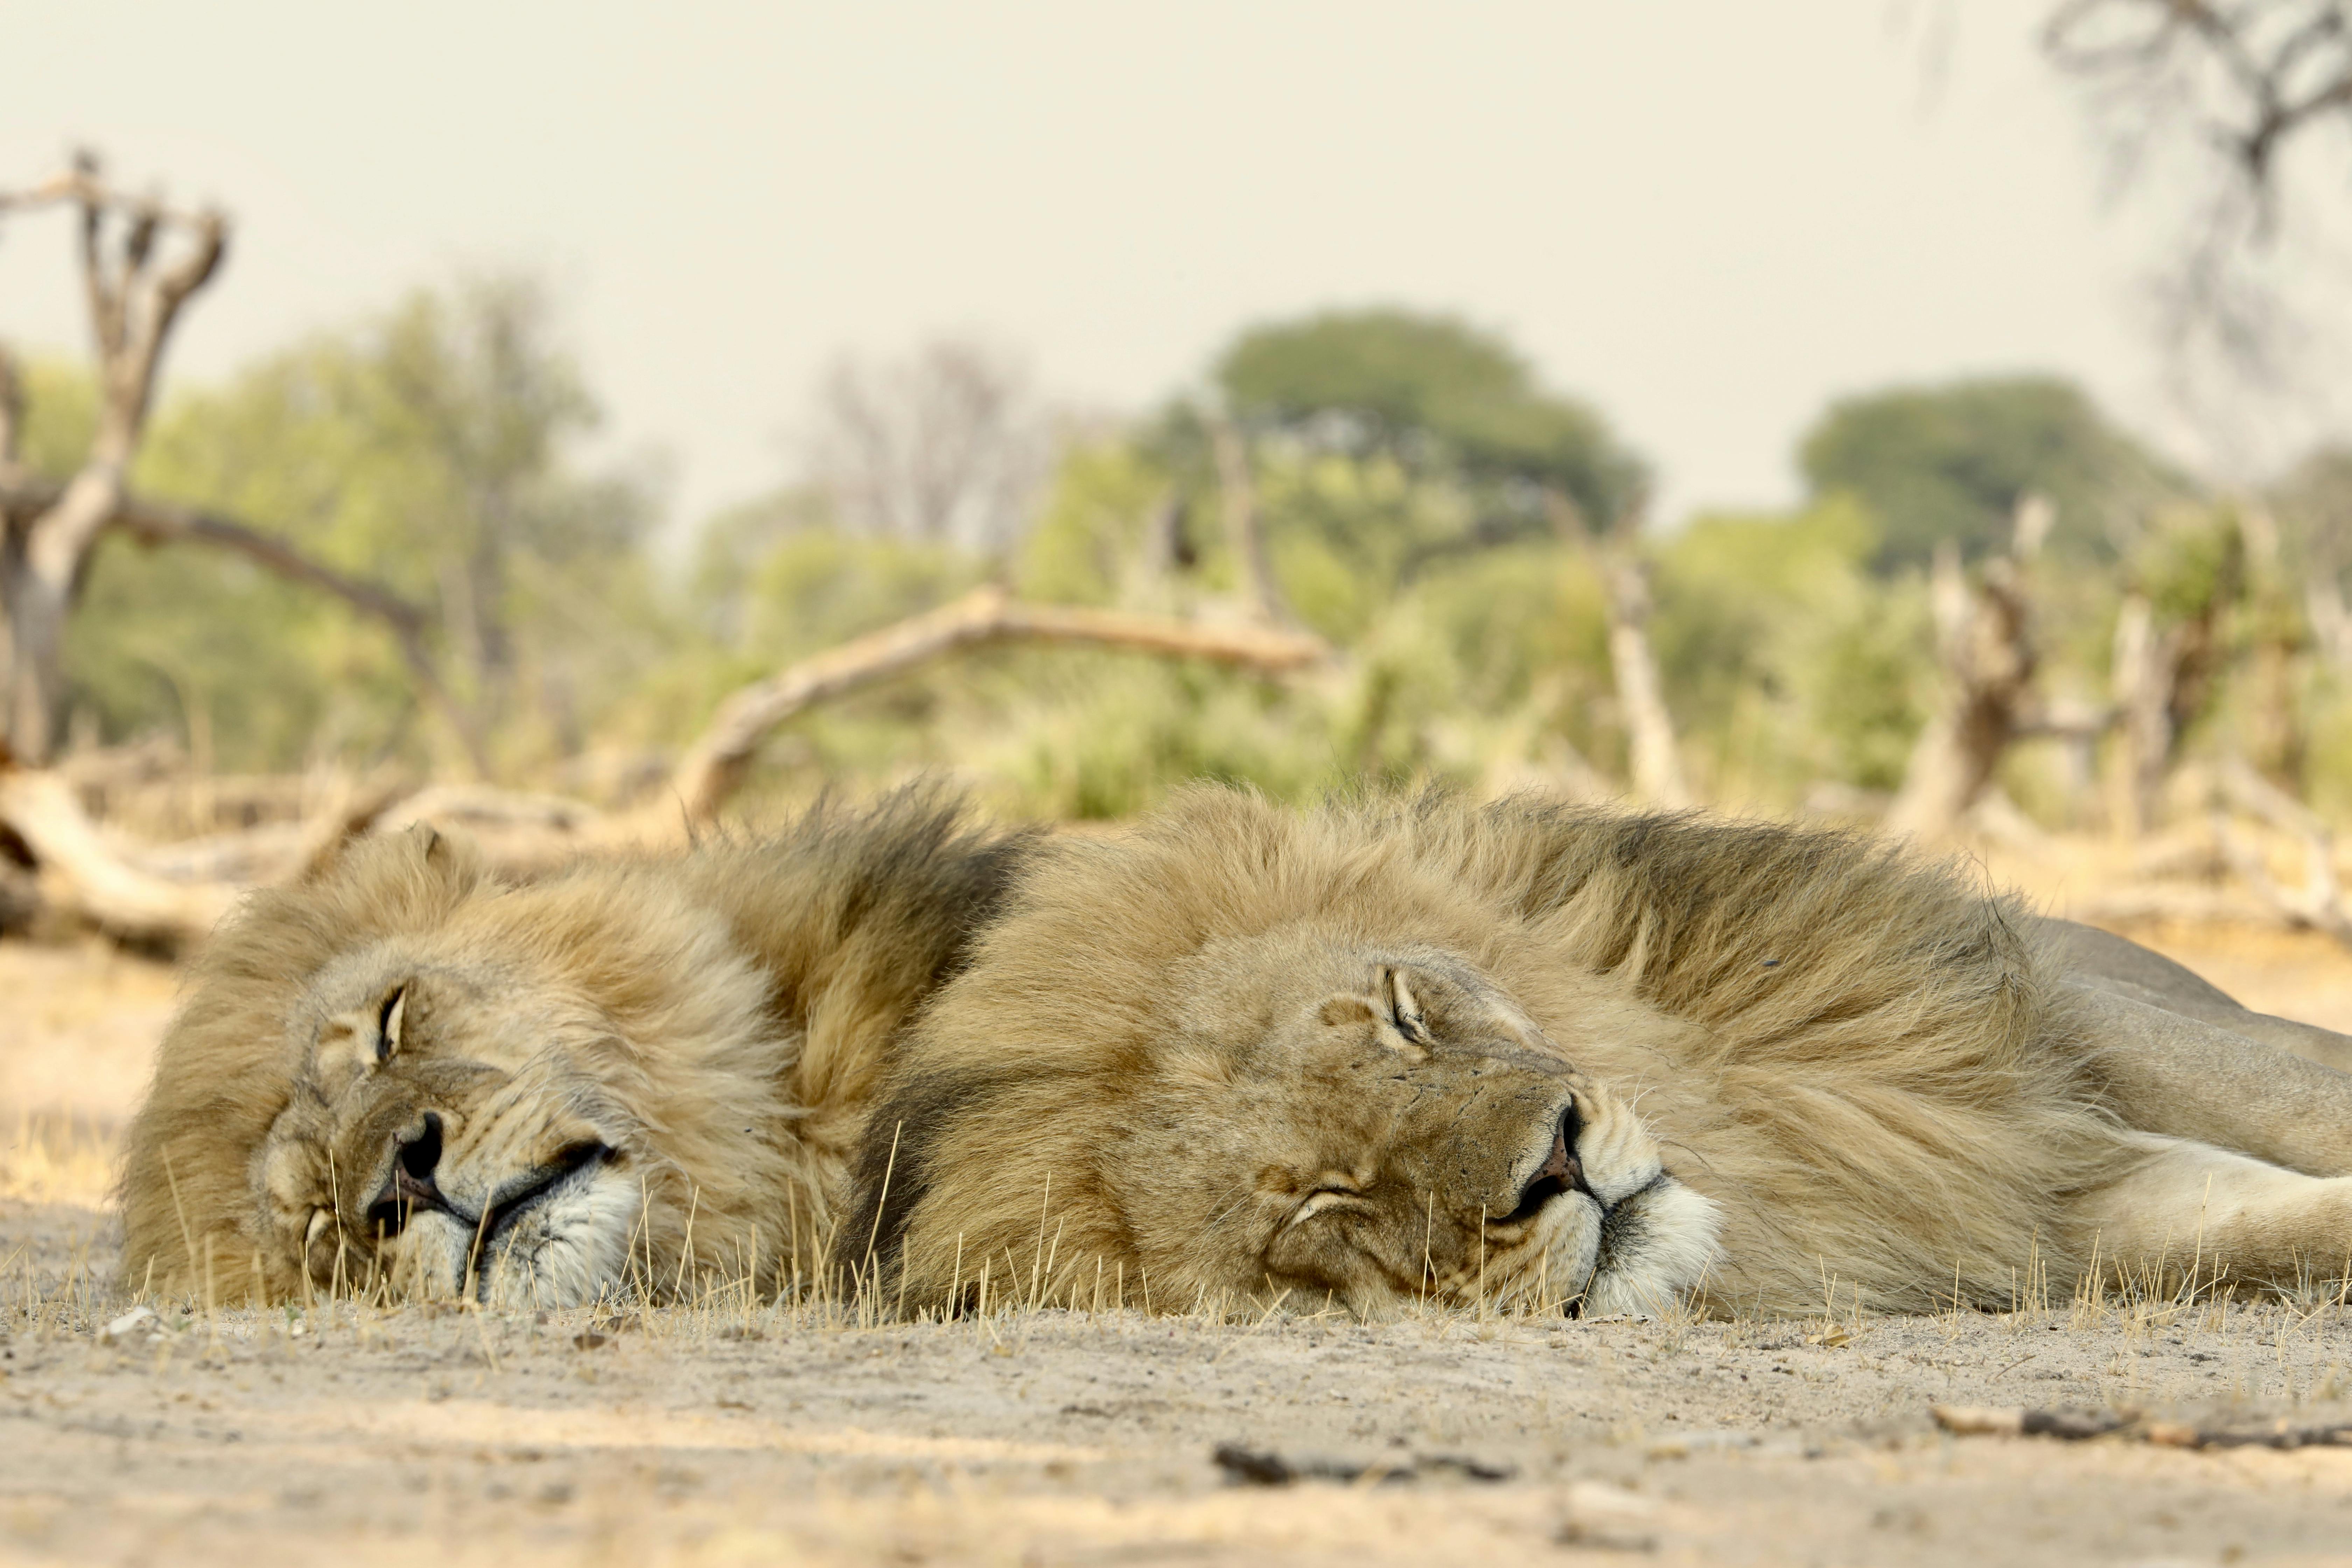 Surveying lions in the Zambezi Valley